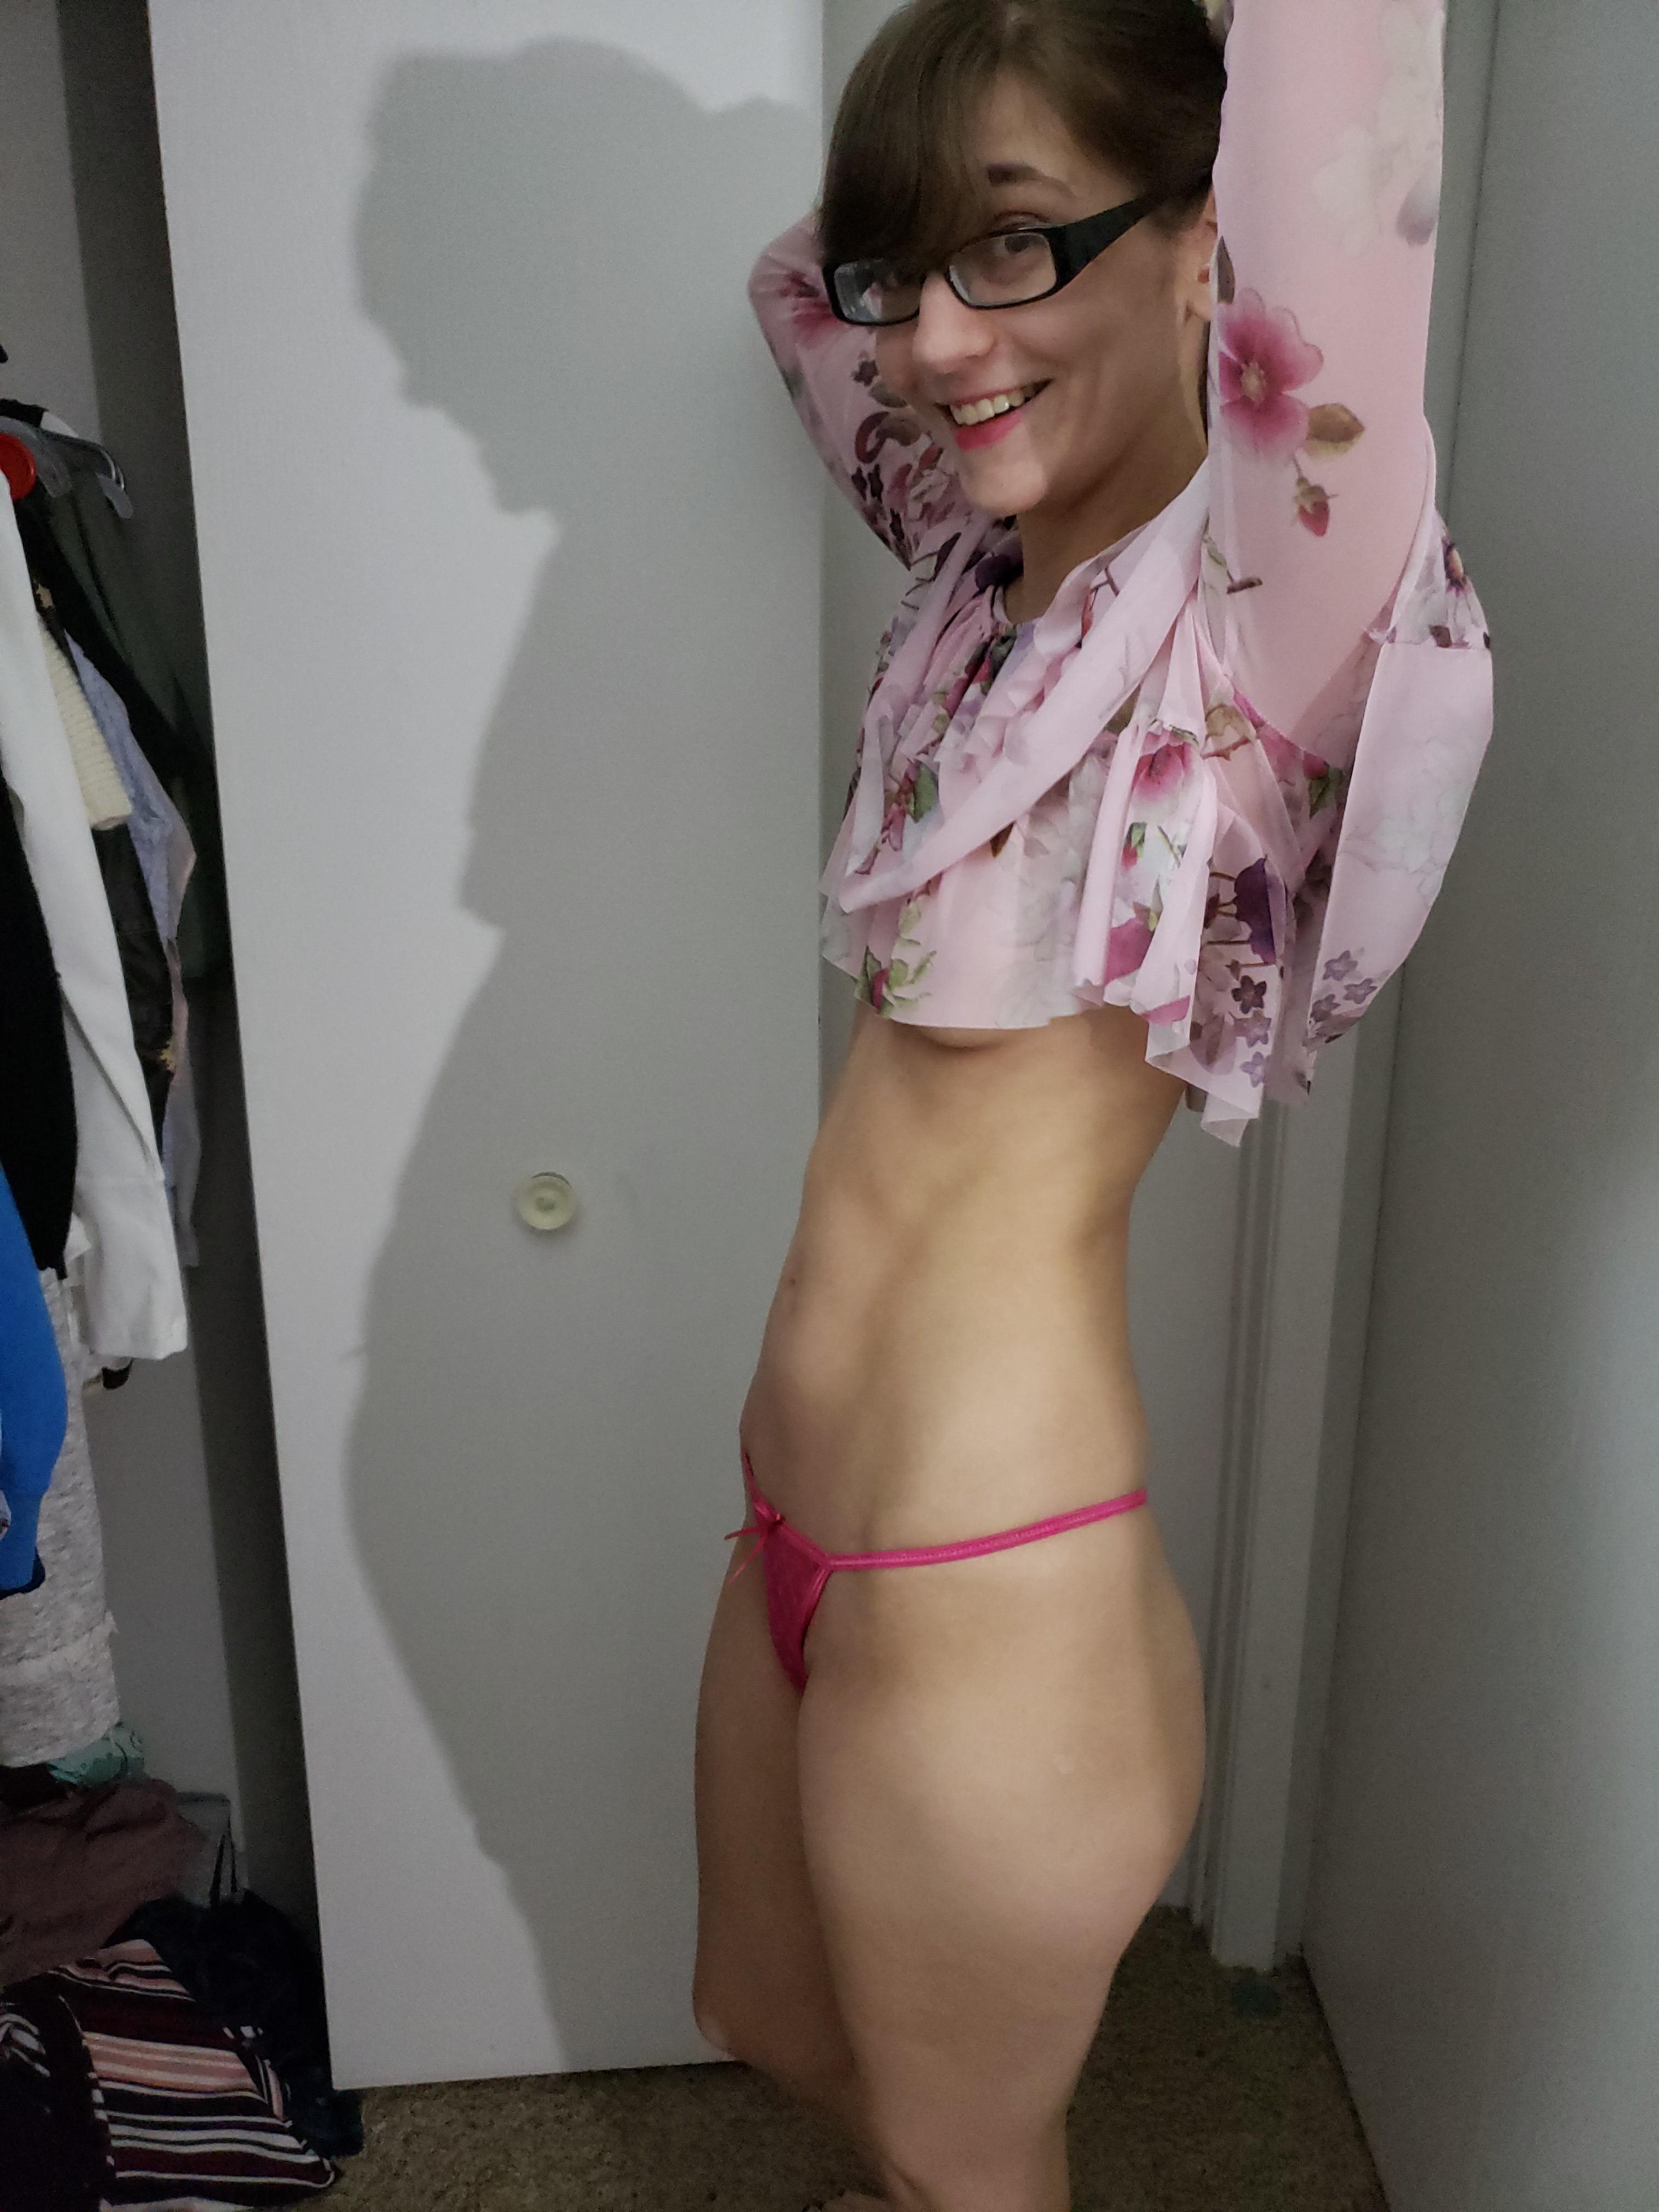 Nerdy - Fit and Nerdy Porn Pic - EPORNER